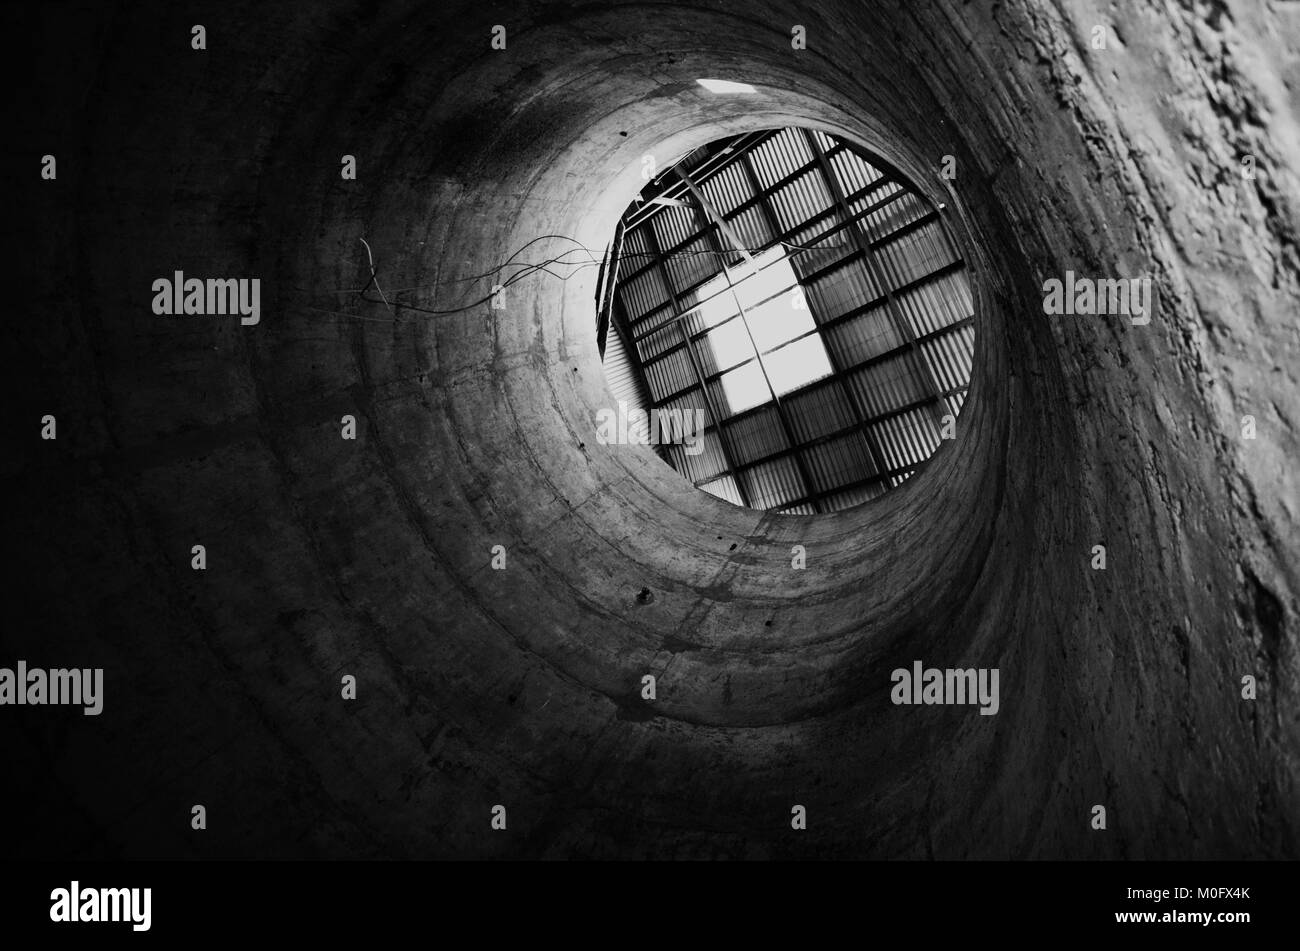 Self Isolation Trapped inside a grain silo in black and white Stock Photo